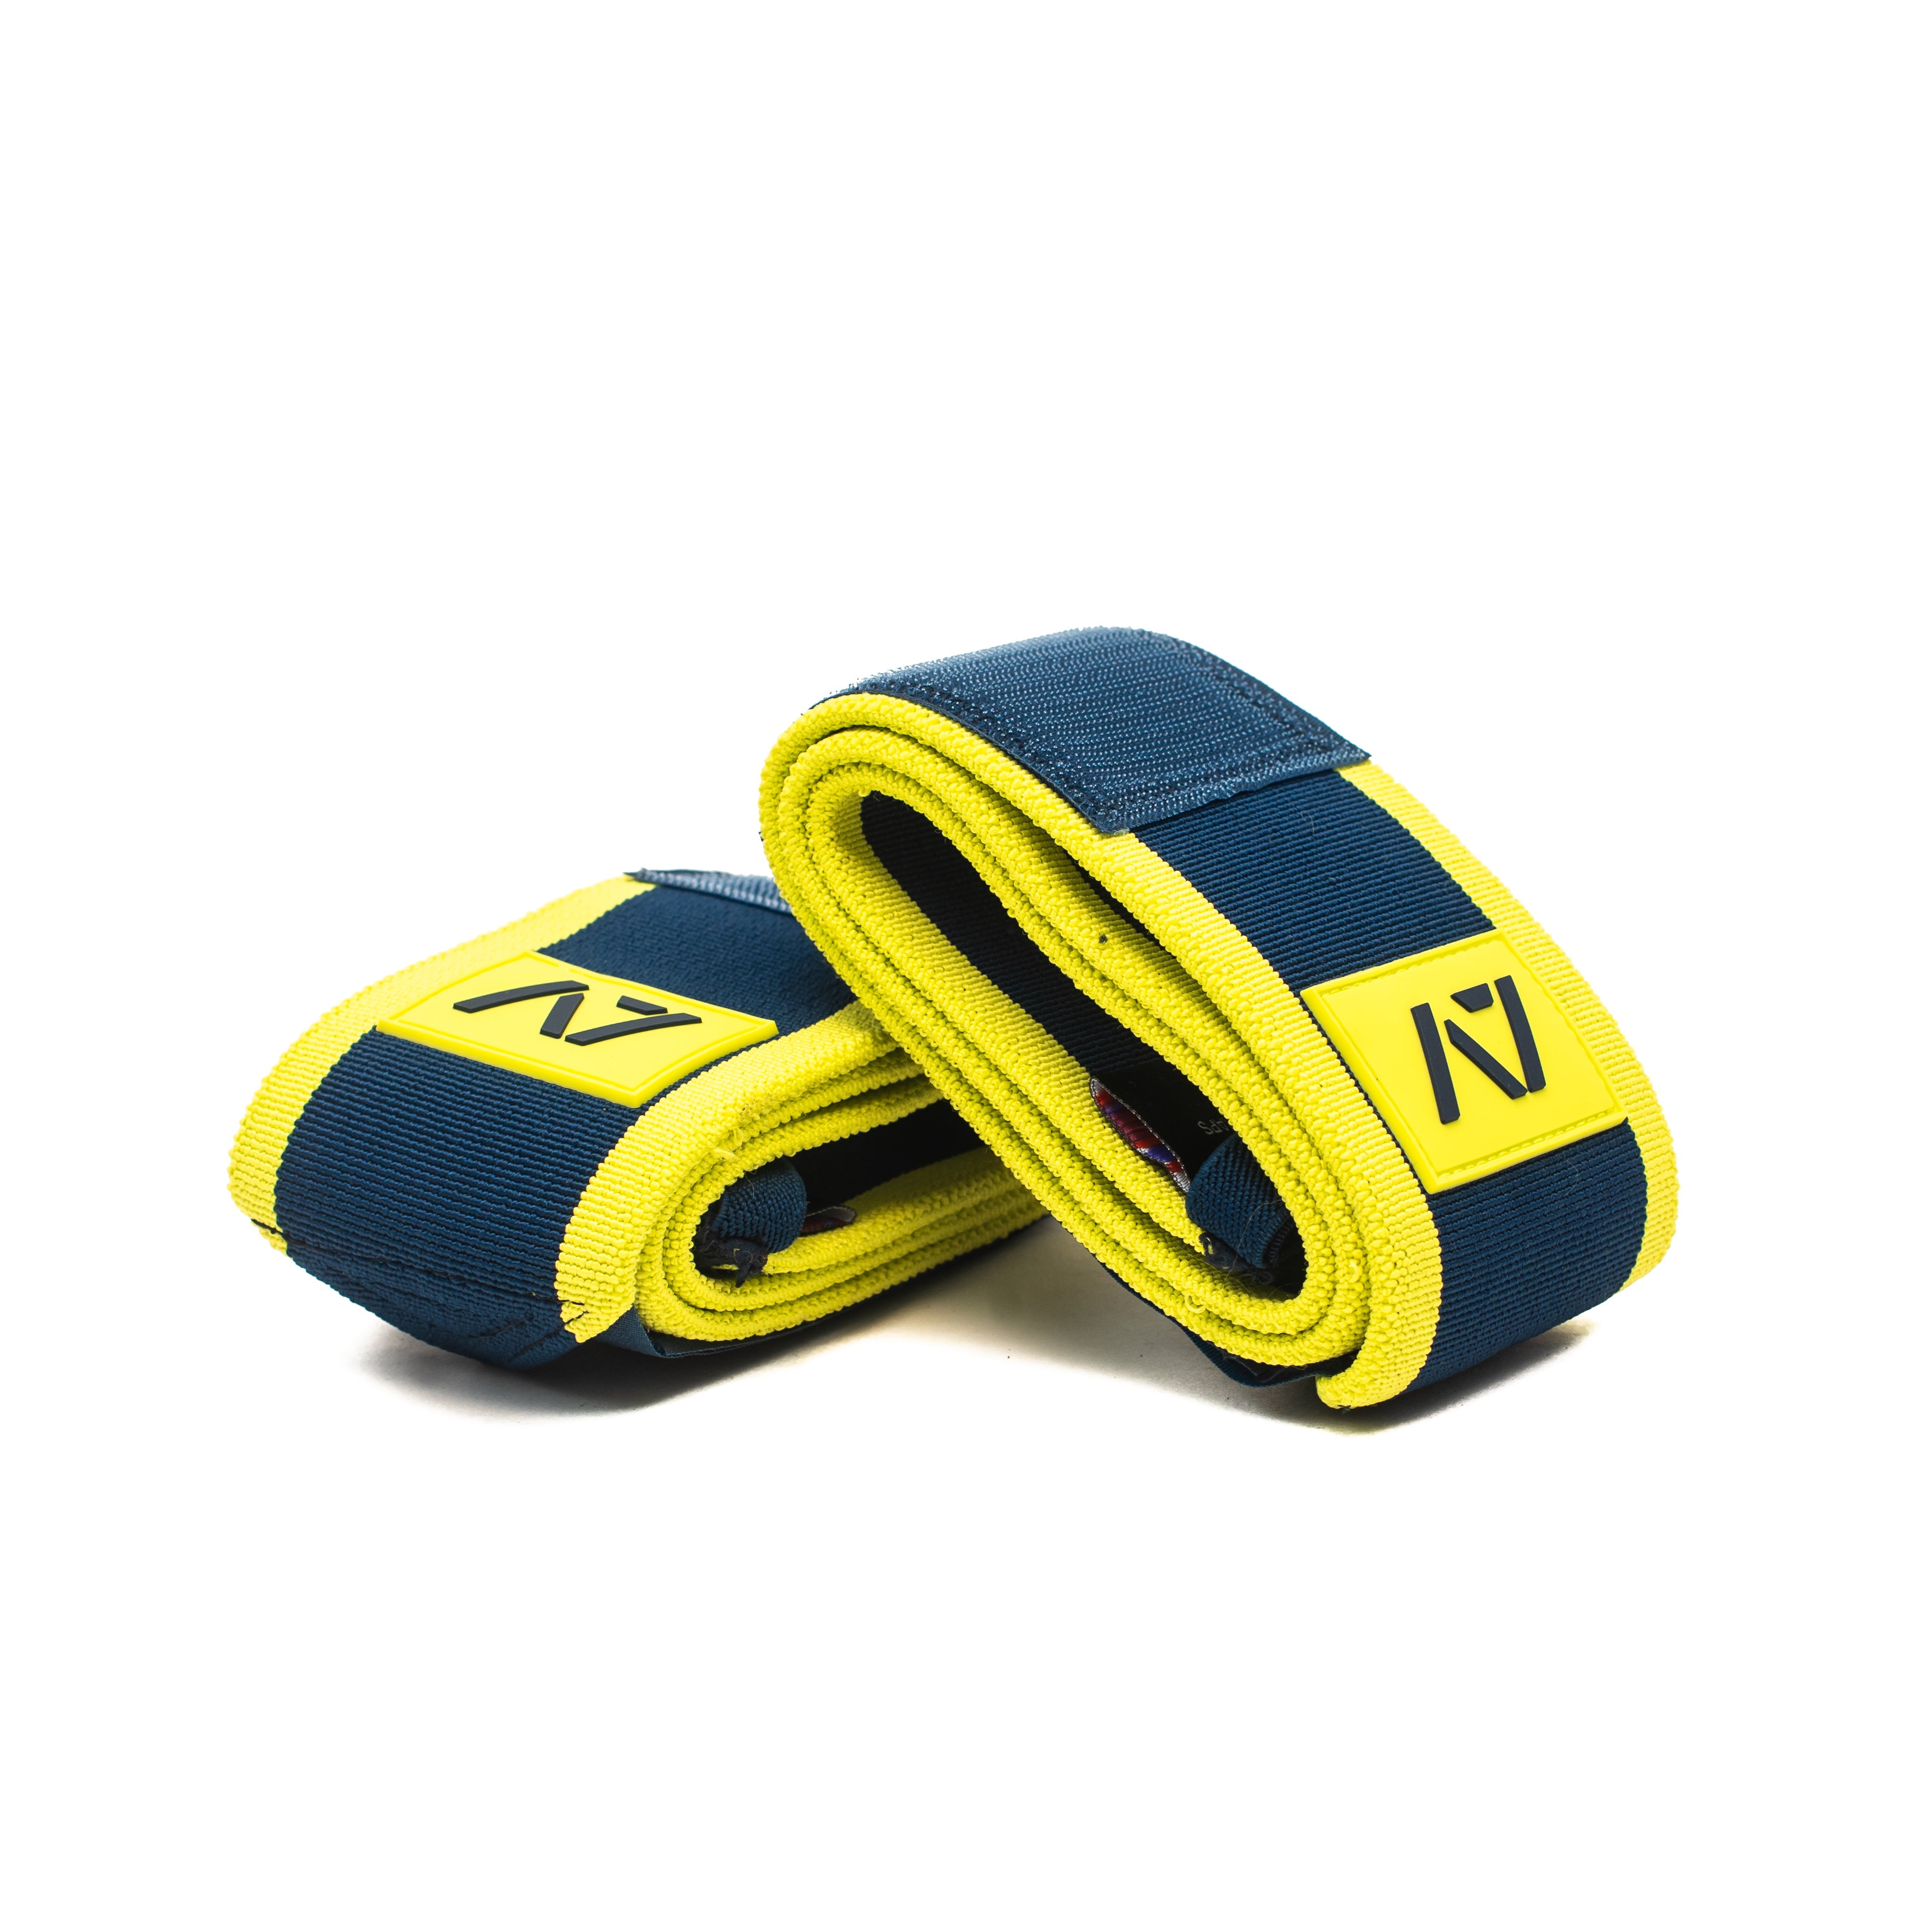 This Electric Lemonade colourway is a refreshing cup of lemonade on a hot day. A colourway that stands out on the platform, while still providing the level of quality, support and comfort you demand from your products. These wrist wraps will remind you to bring your electricity to hit those lifts. These wrist wraps are a perfect addition to your IPF approved kit.